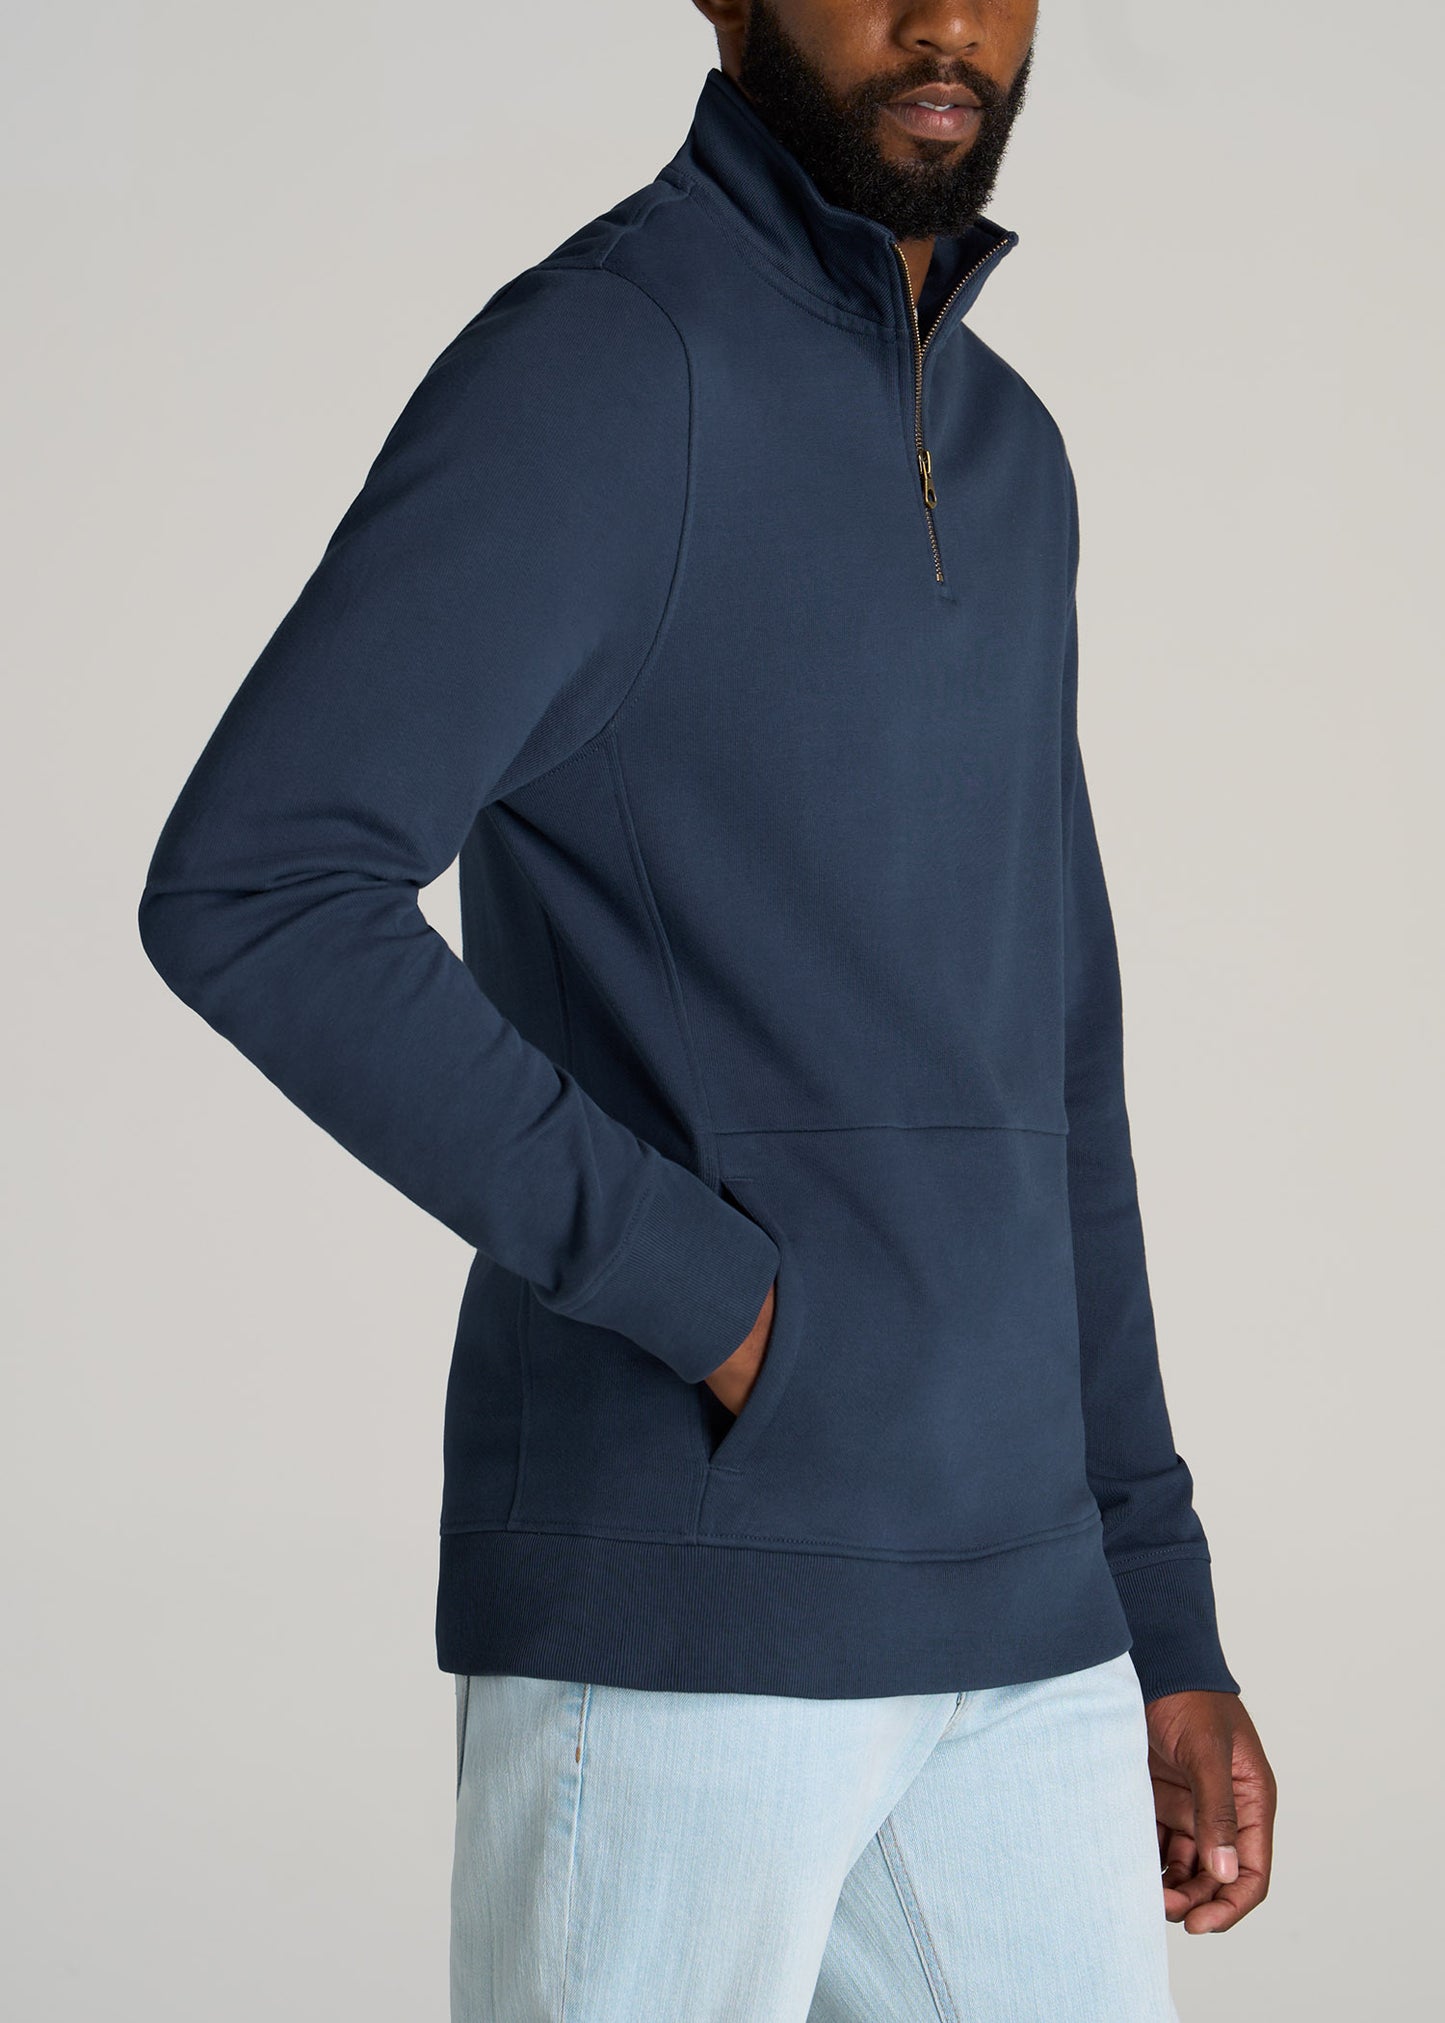       American-Tall-Men-Heavyweight-French-Terry-Quarter-Zip-Pullover-Vintage-Midnight-Navy-side